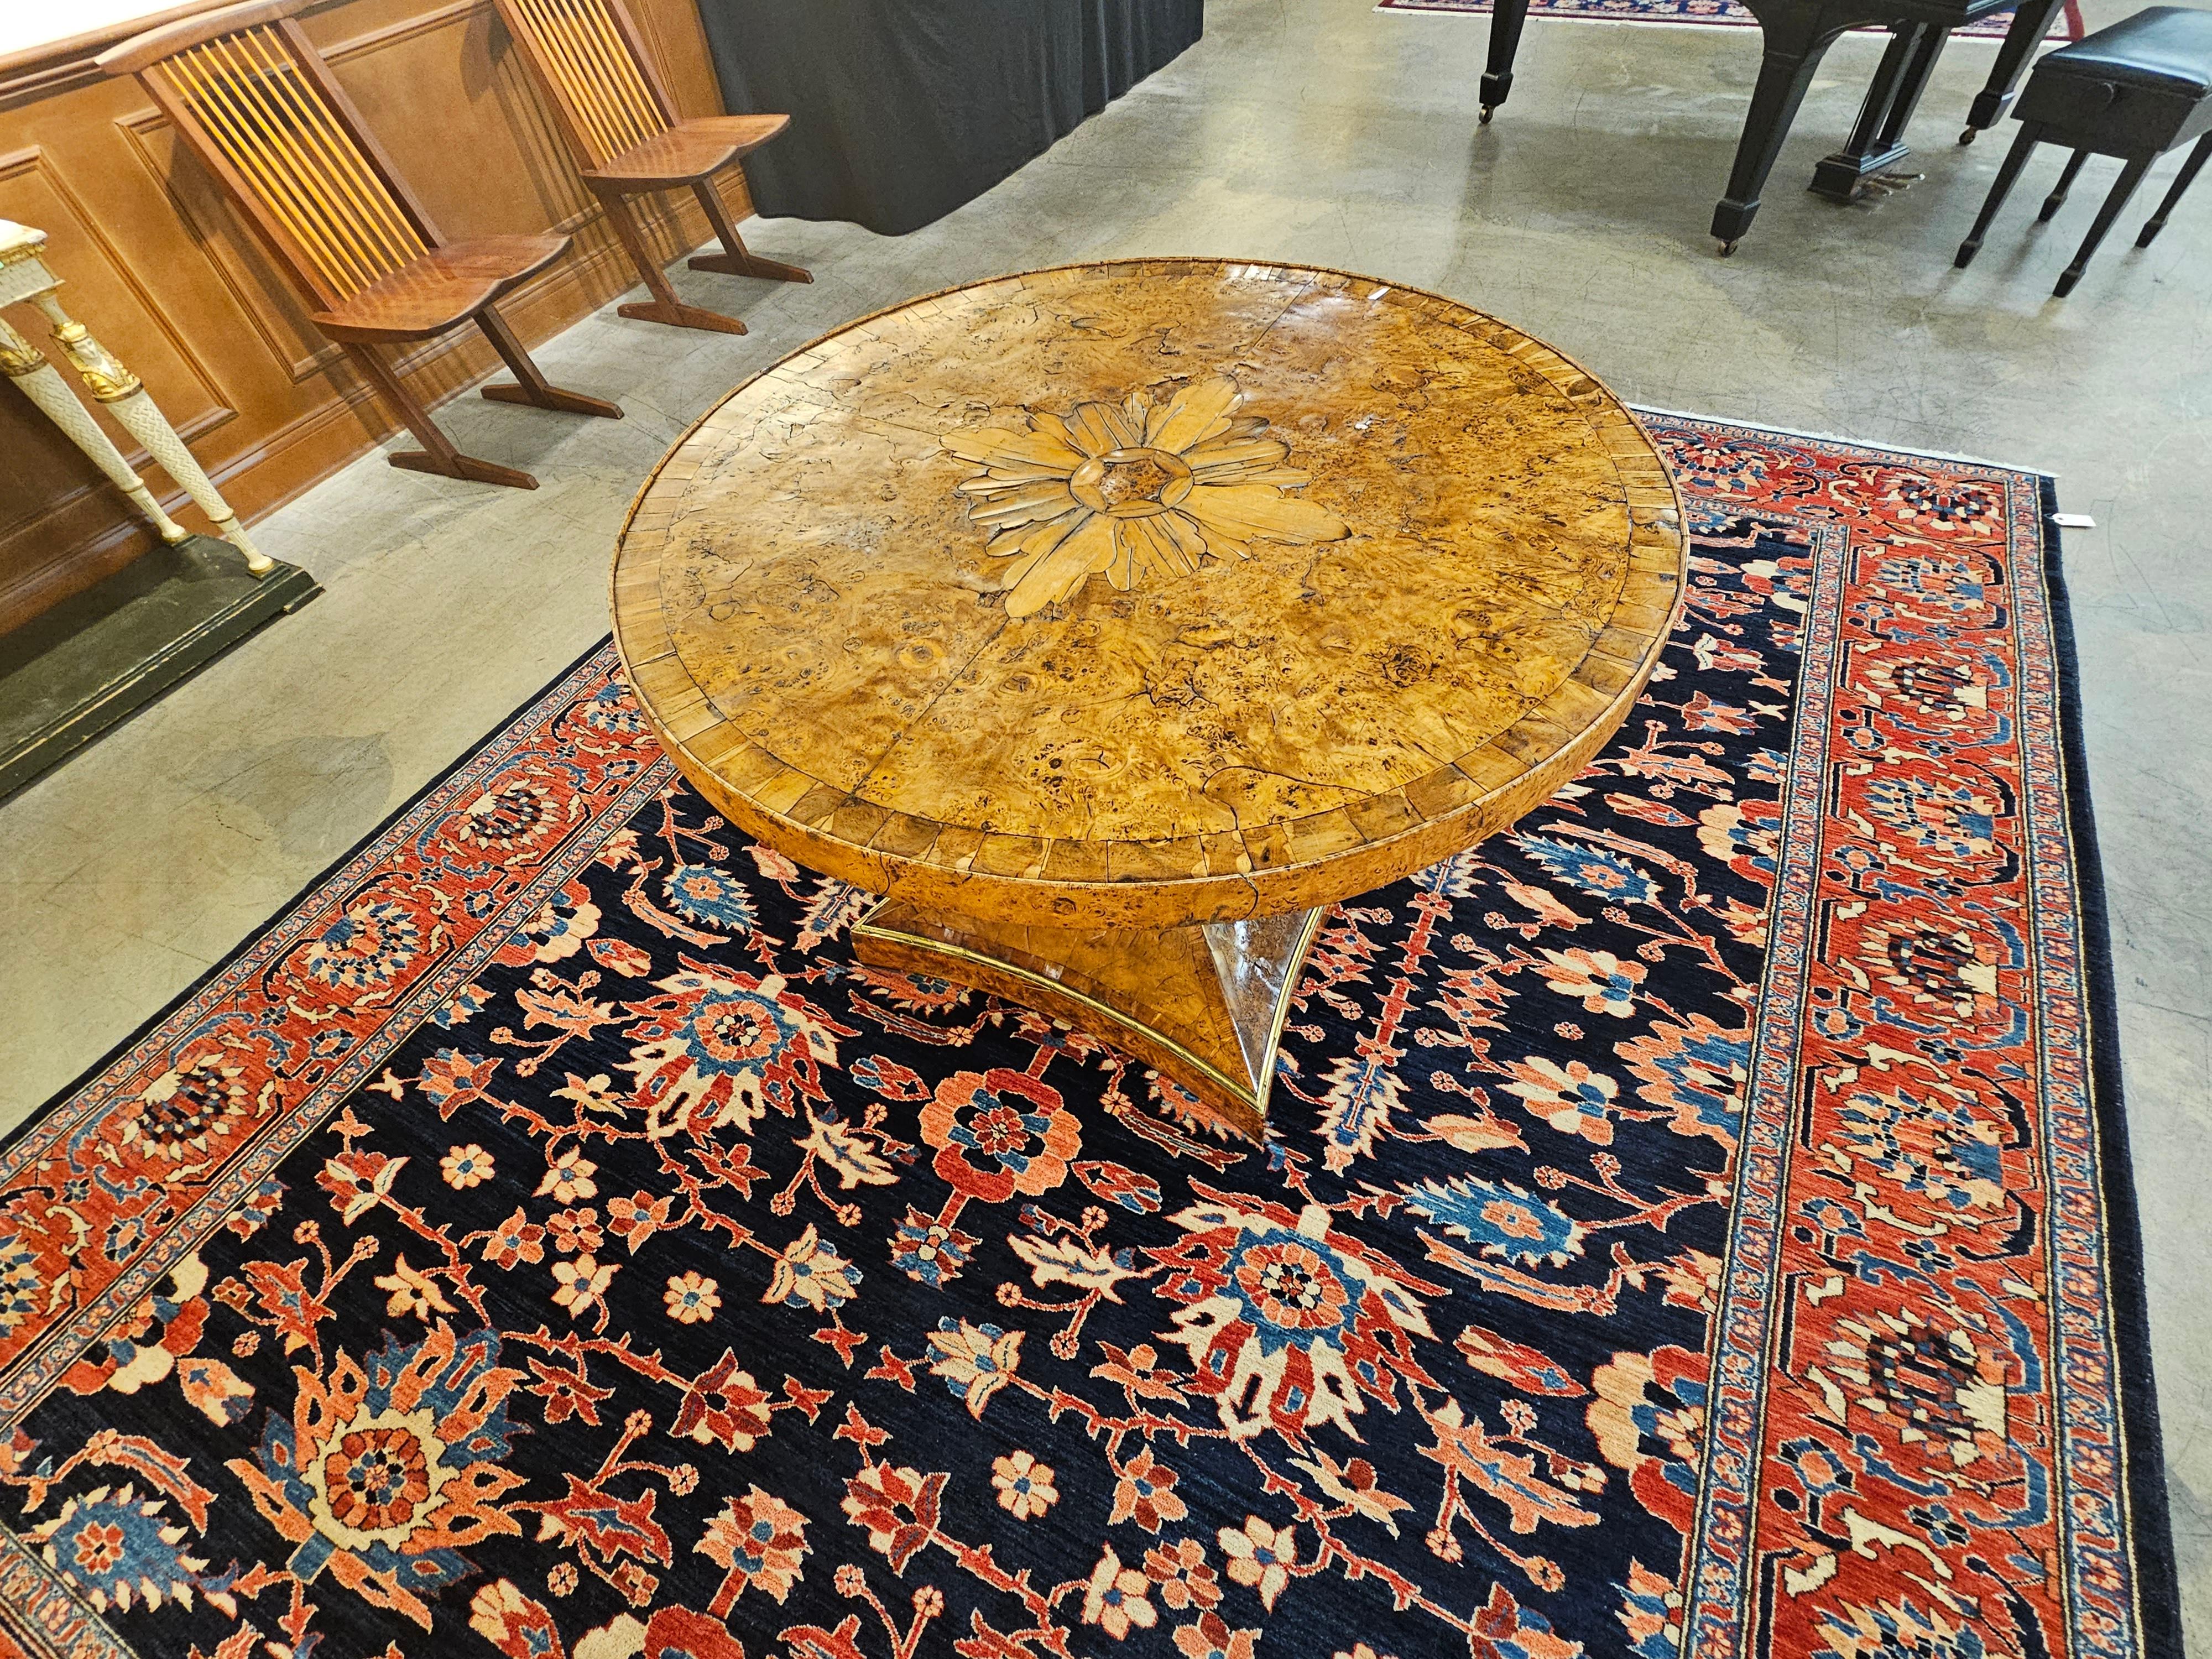 1820s Biedermeier Brass Mounted Carelian Birch and Marquetry Center Table For Sale 4